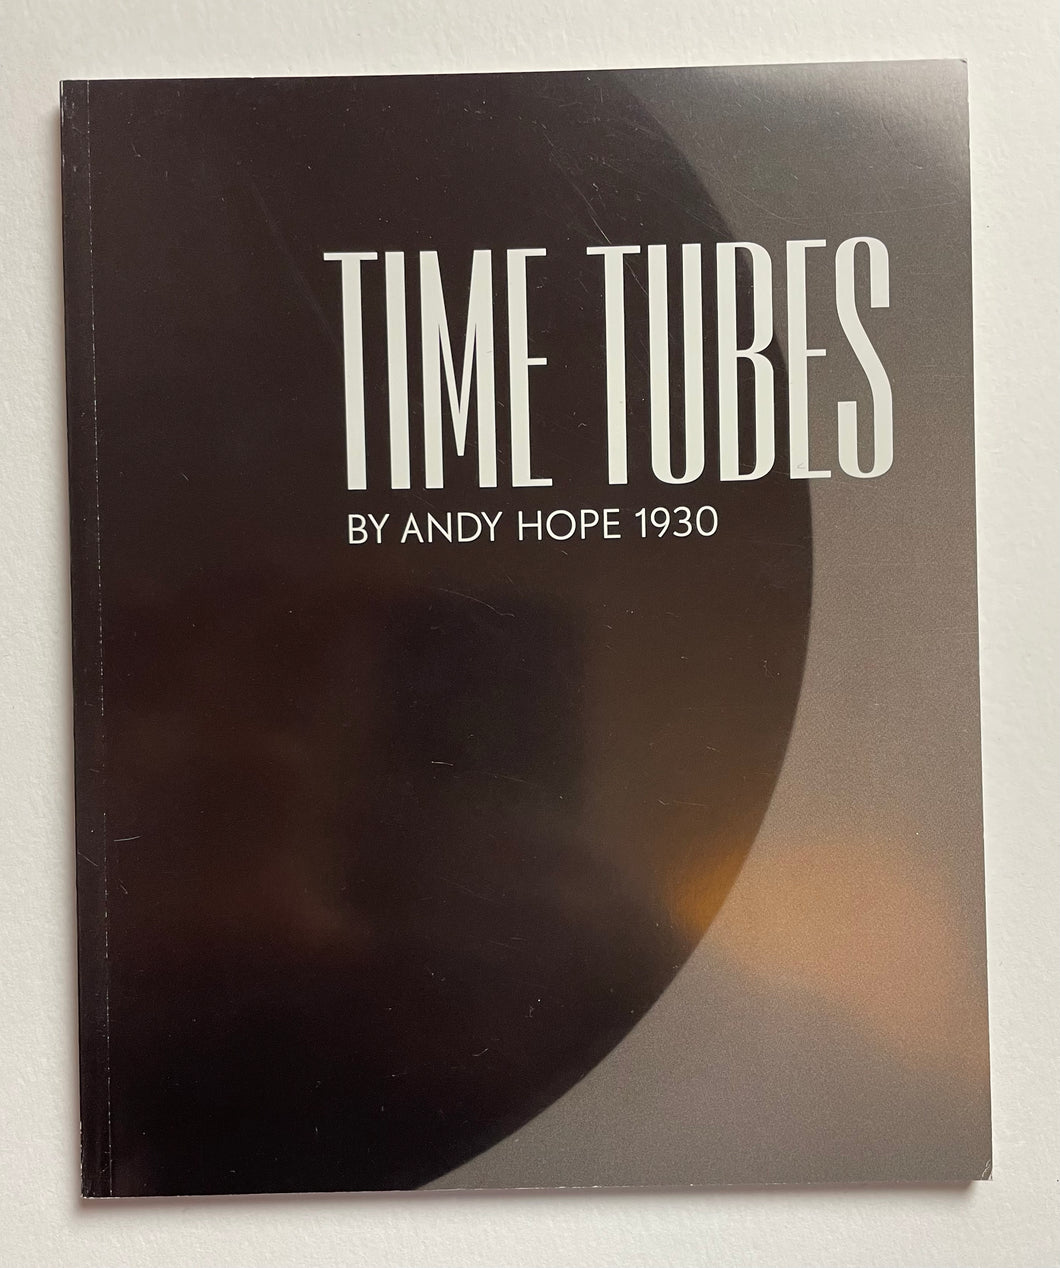 Time tubes | Andy Hope 1930 (Revolver)